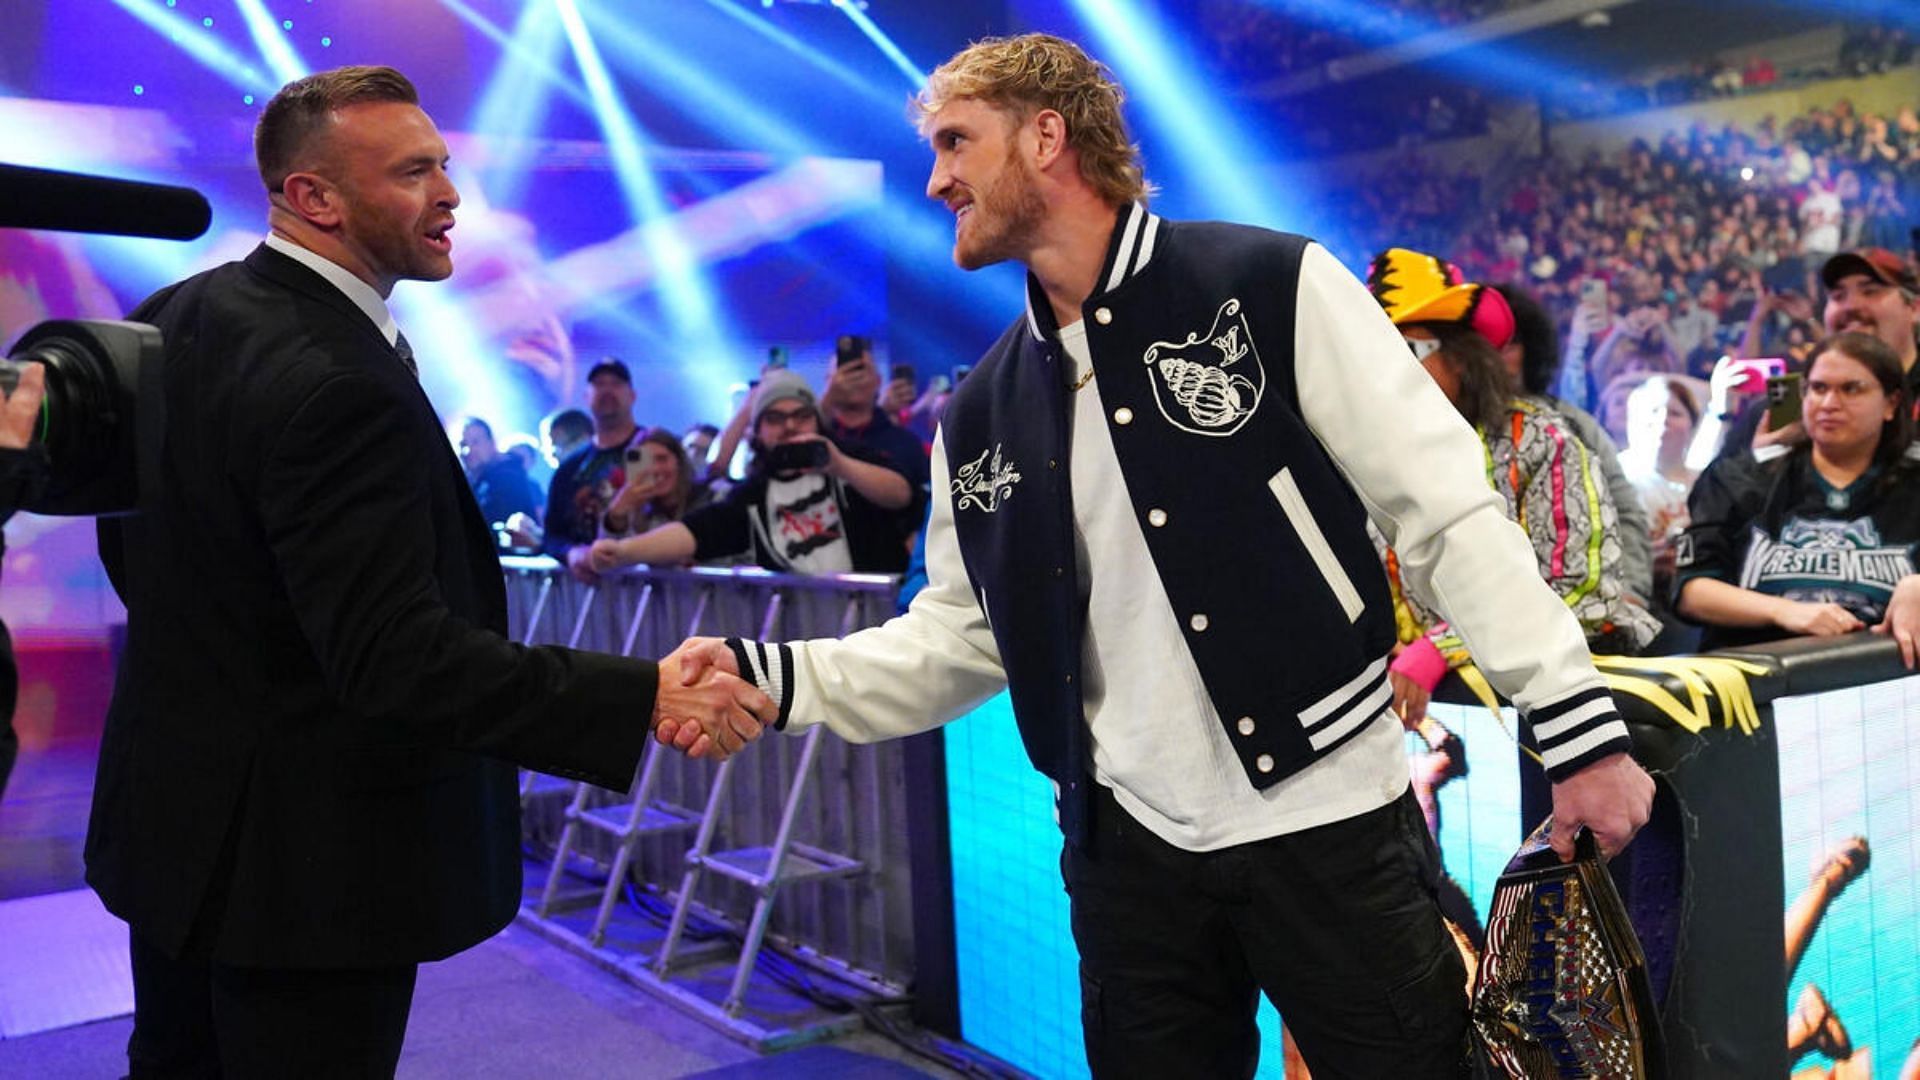 Logan Paul will compete at The King and Queen of The Ring PLE